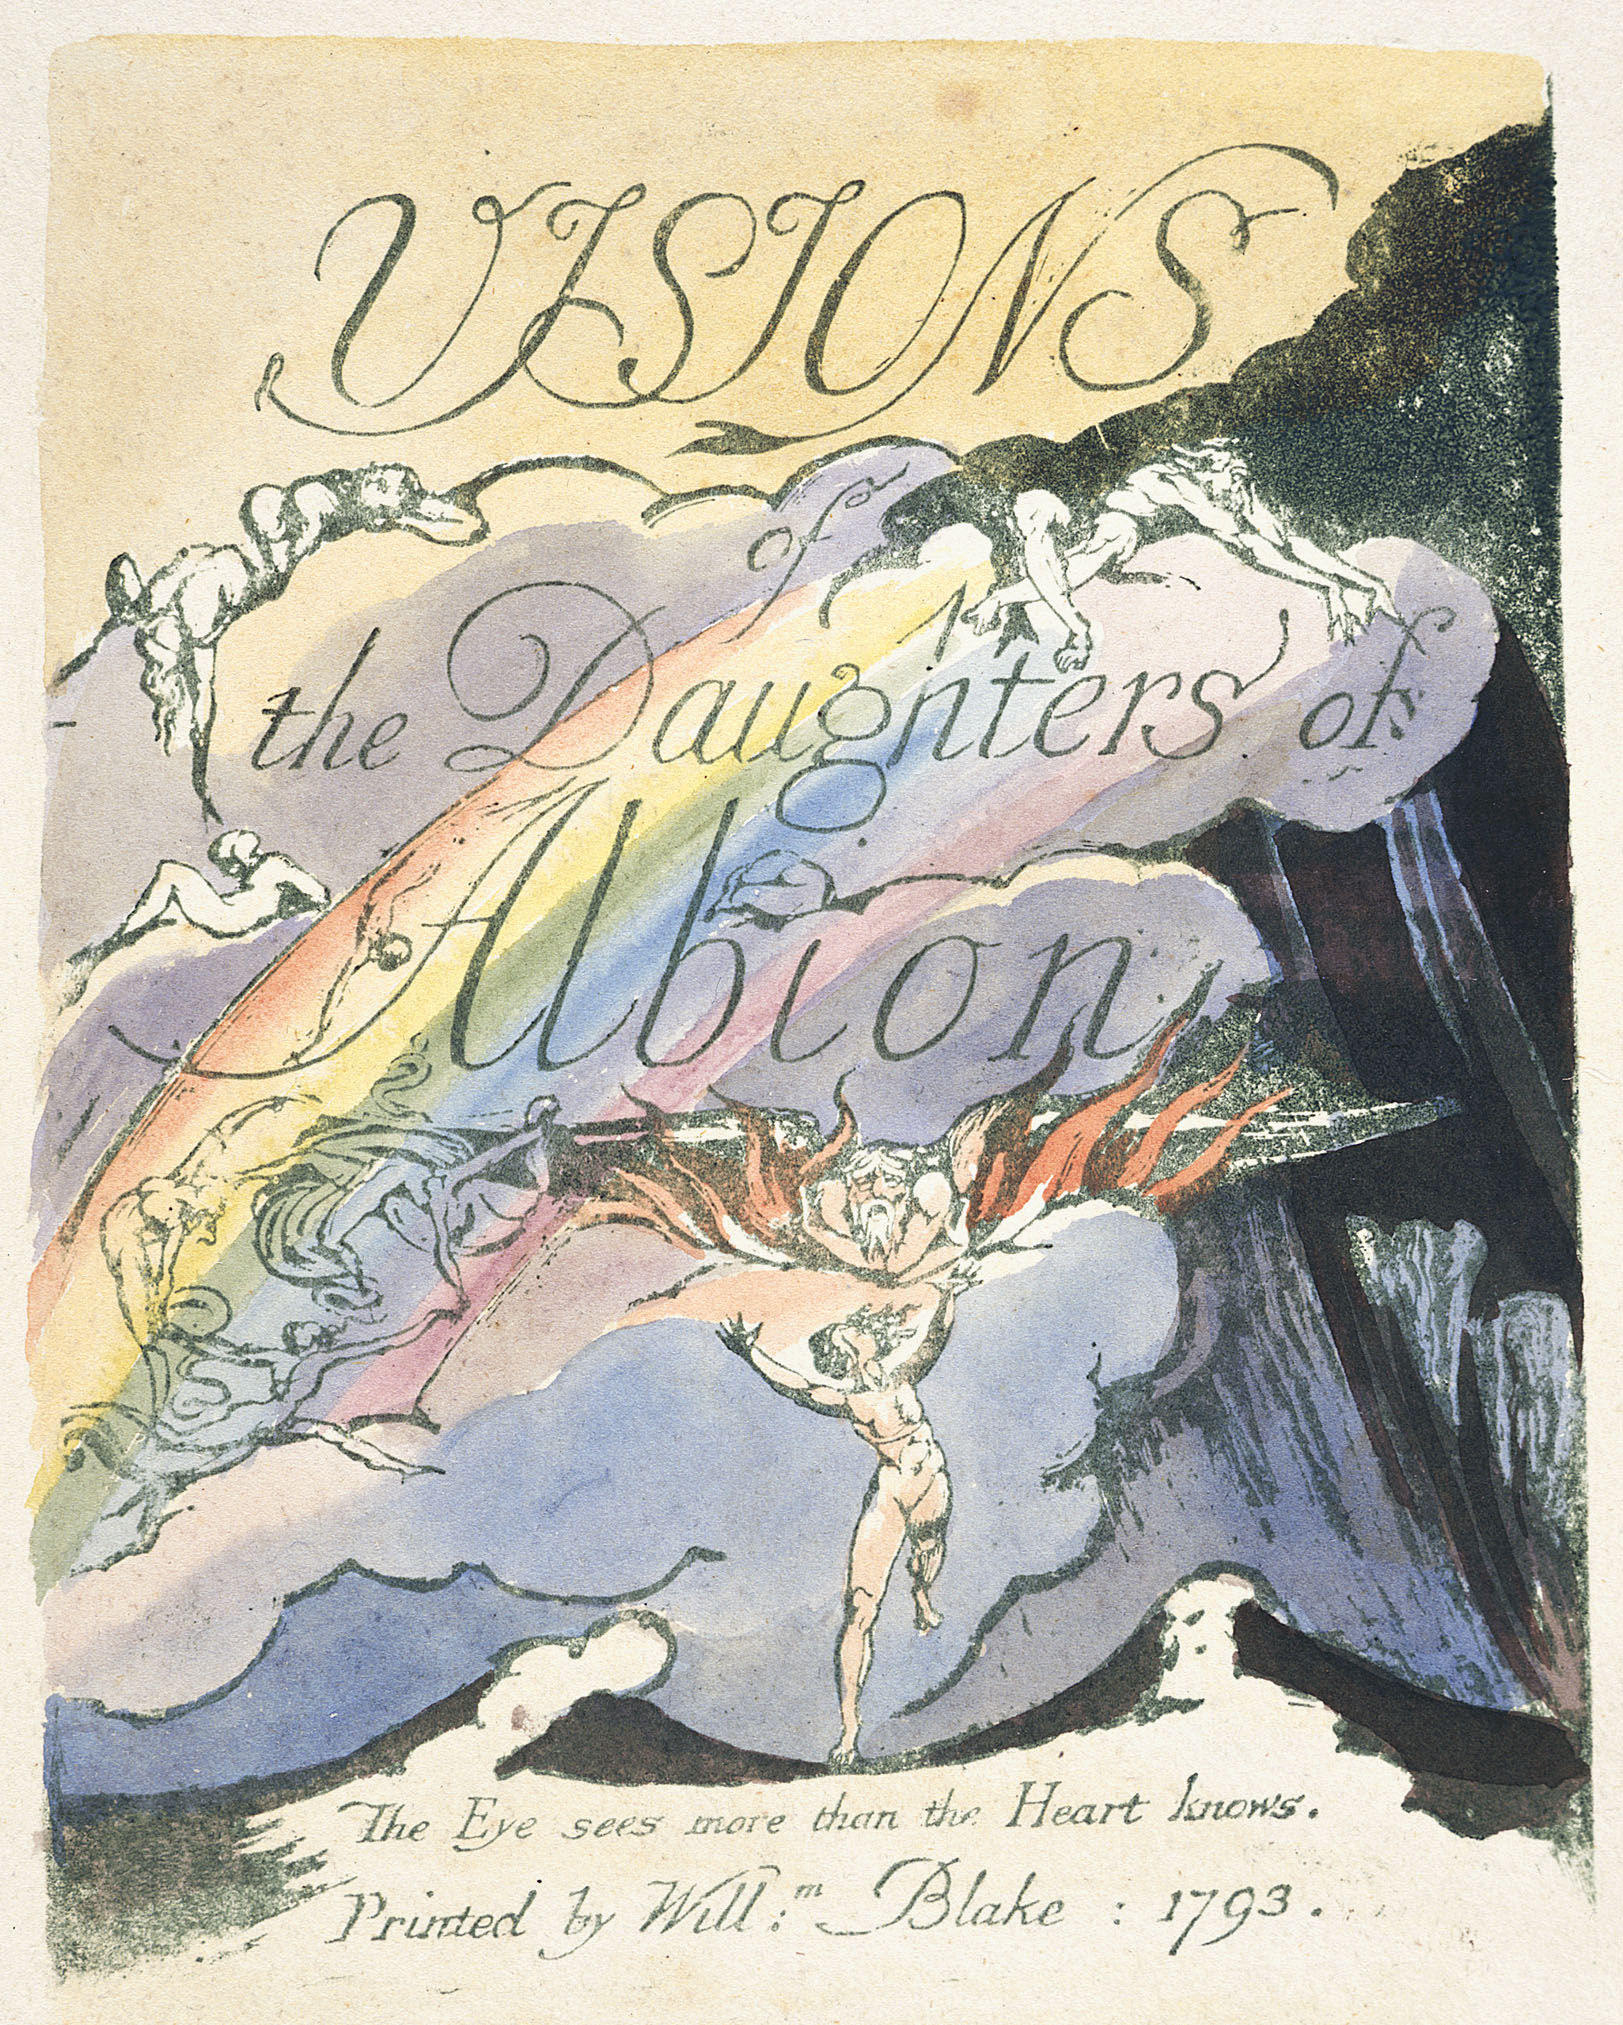 VISIONS
	of
	the Daughters of
	Albion
	The Eye sees more than the Heart knows.
	Printed by Will:m Blake : 1793.